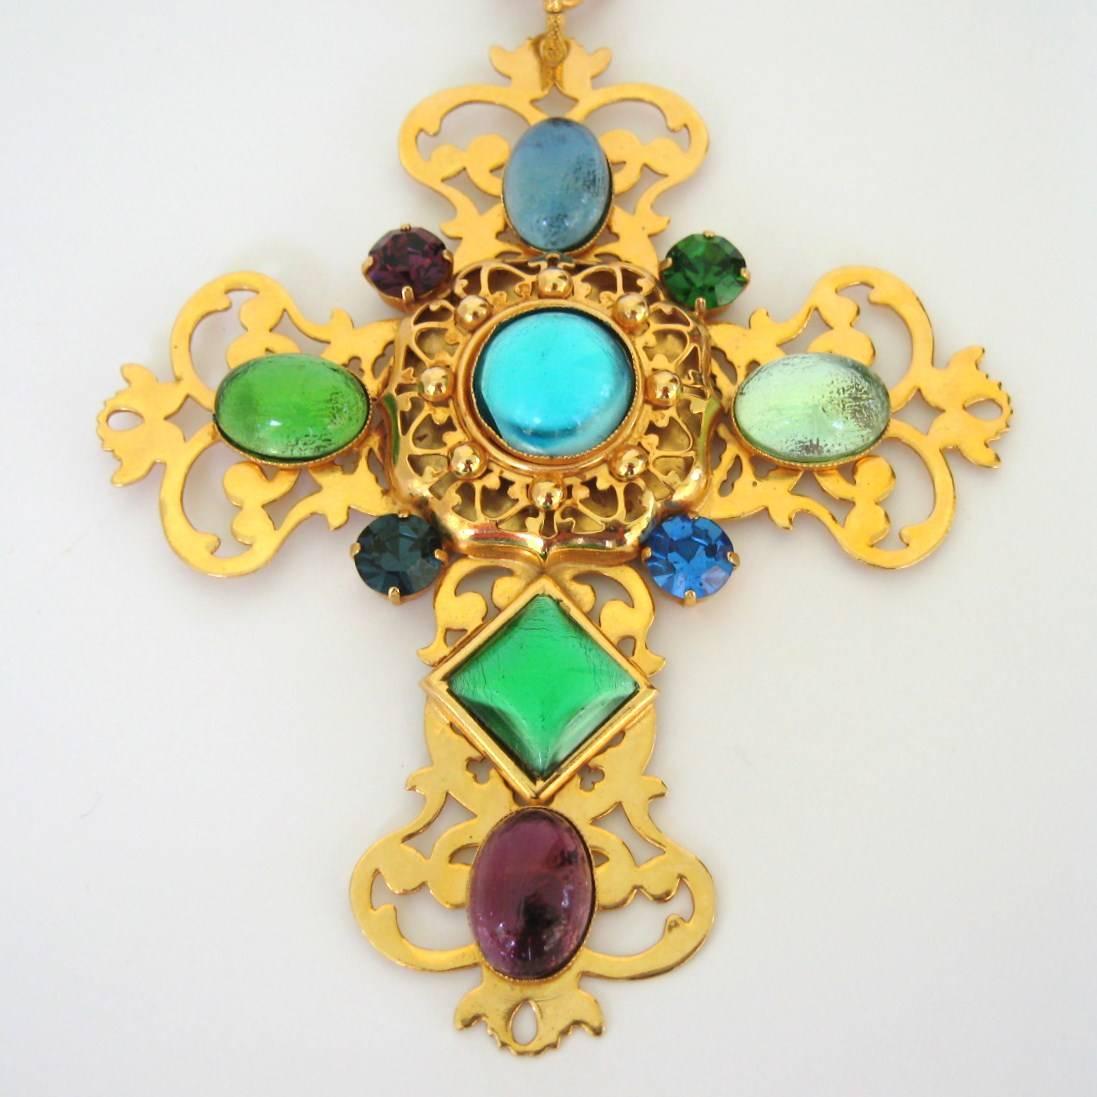 Philippe Ferrandis Gripoix Cross CrossNecklace. Another spectacular Handmade Creation from Phillipe Ferrandis. The colors are bold & iridescent The colors in green, purple and shades of blues. Cross is 127.16 mm or 5 inch Long x 108.94 mm or 4.28 in